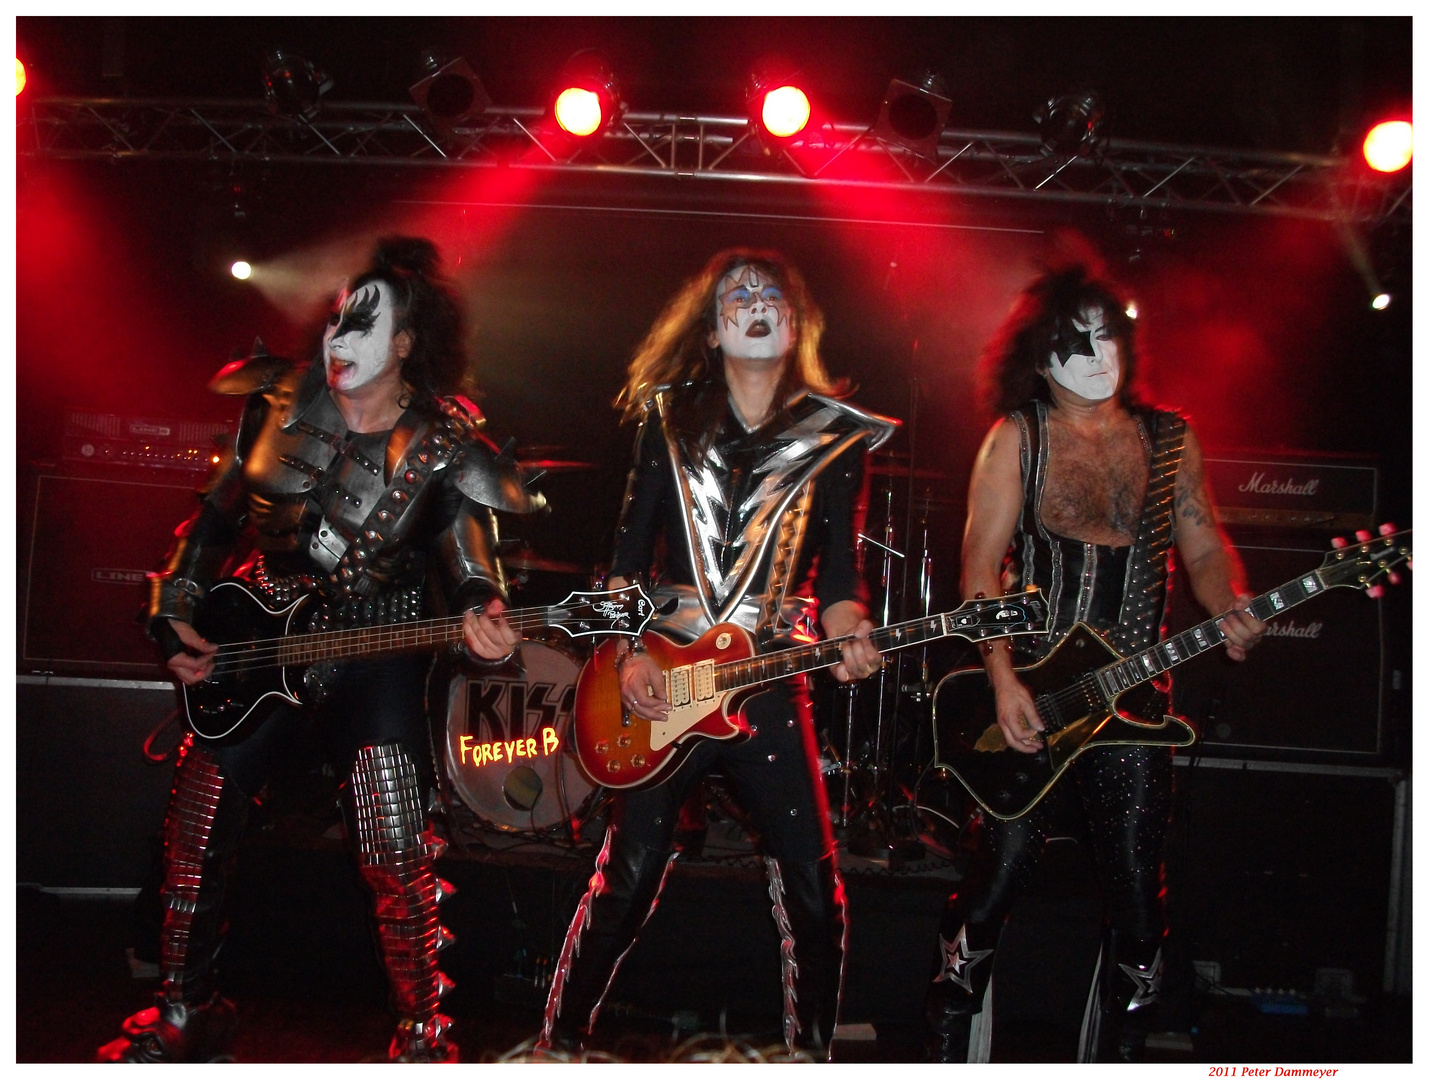 "Kiss Forever Band" in Action